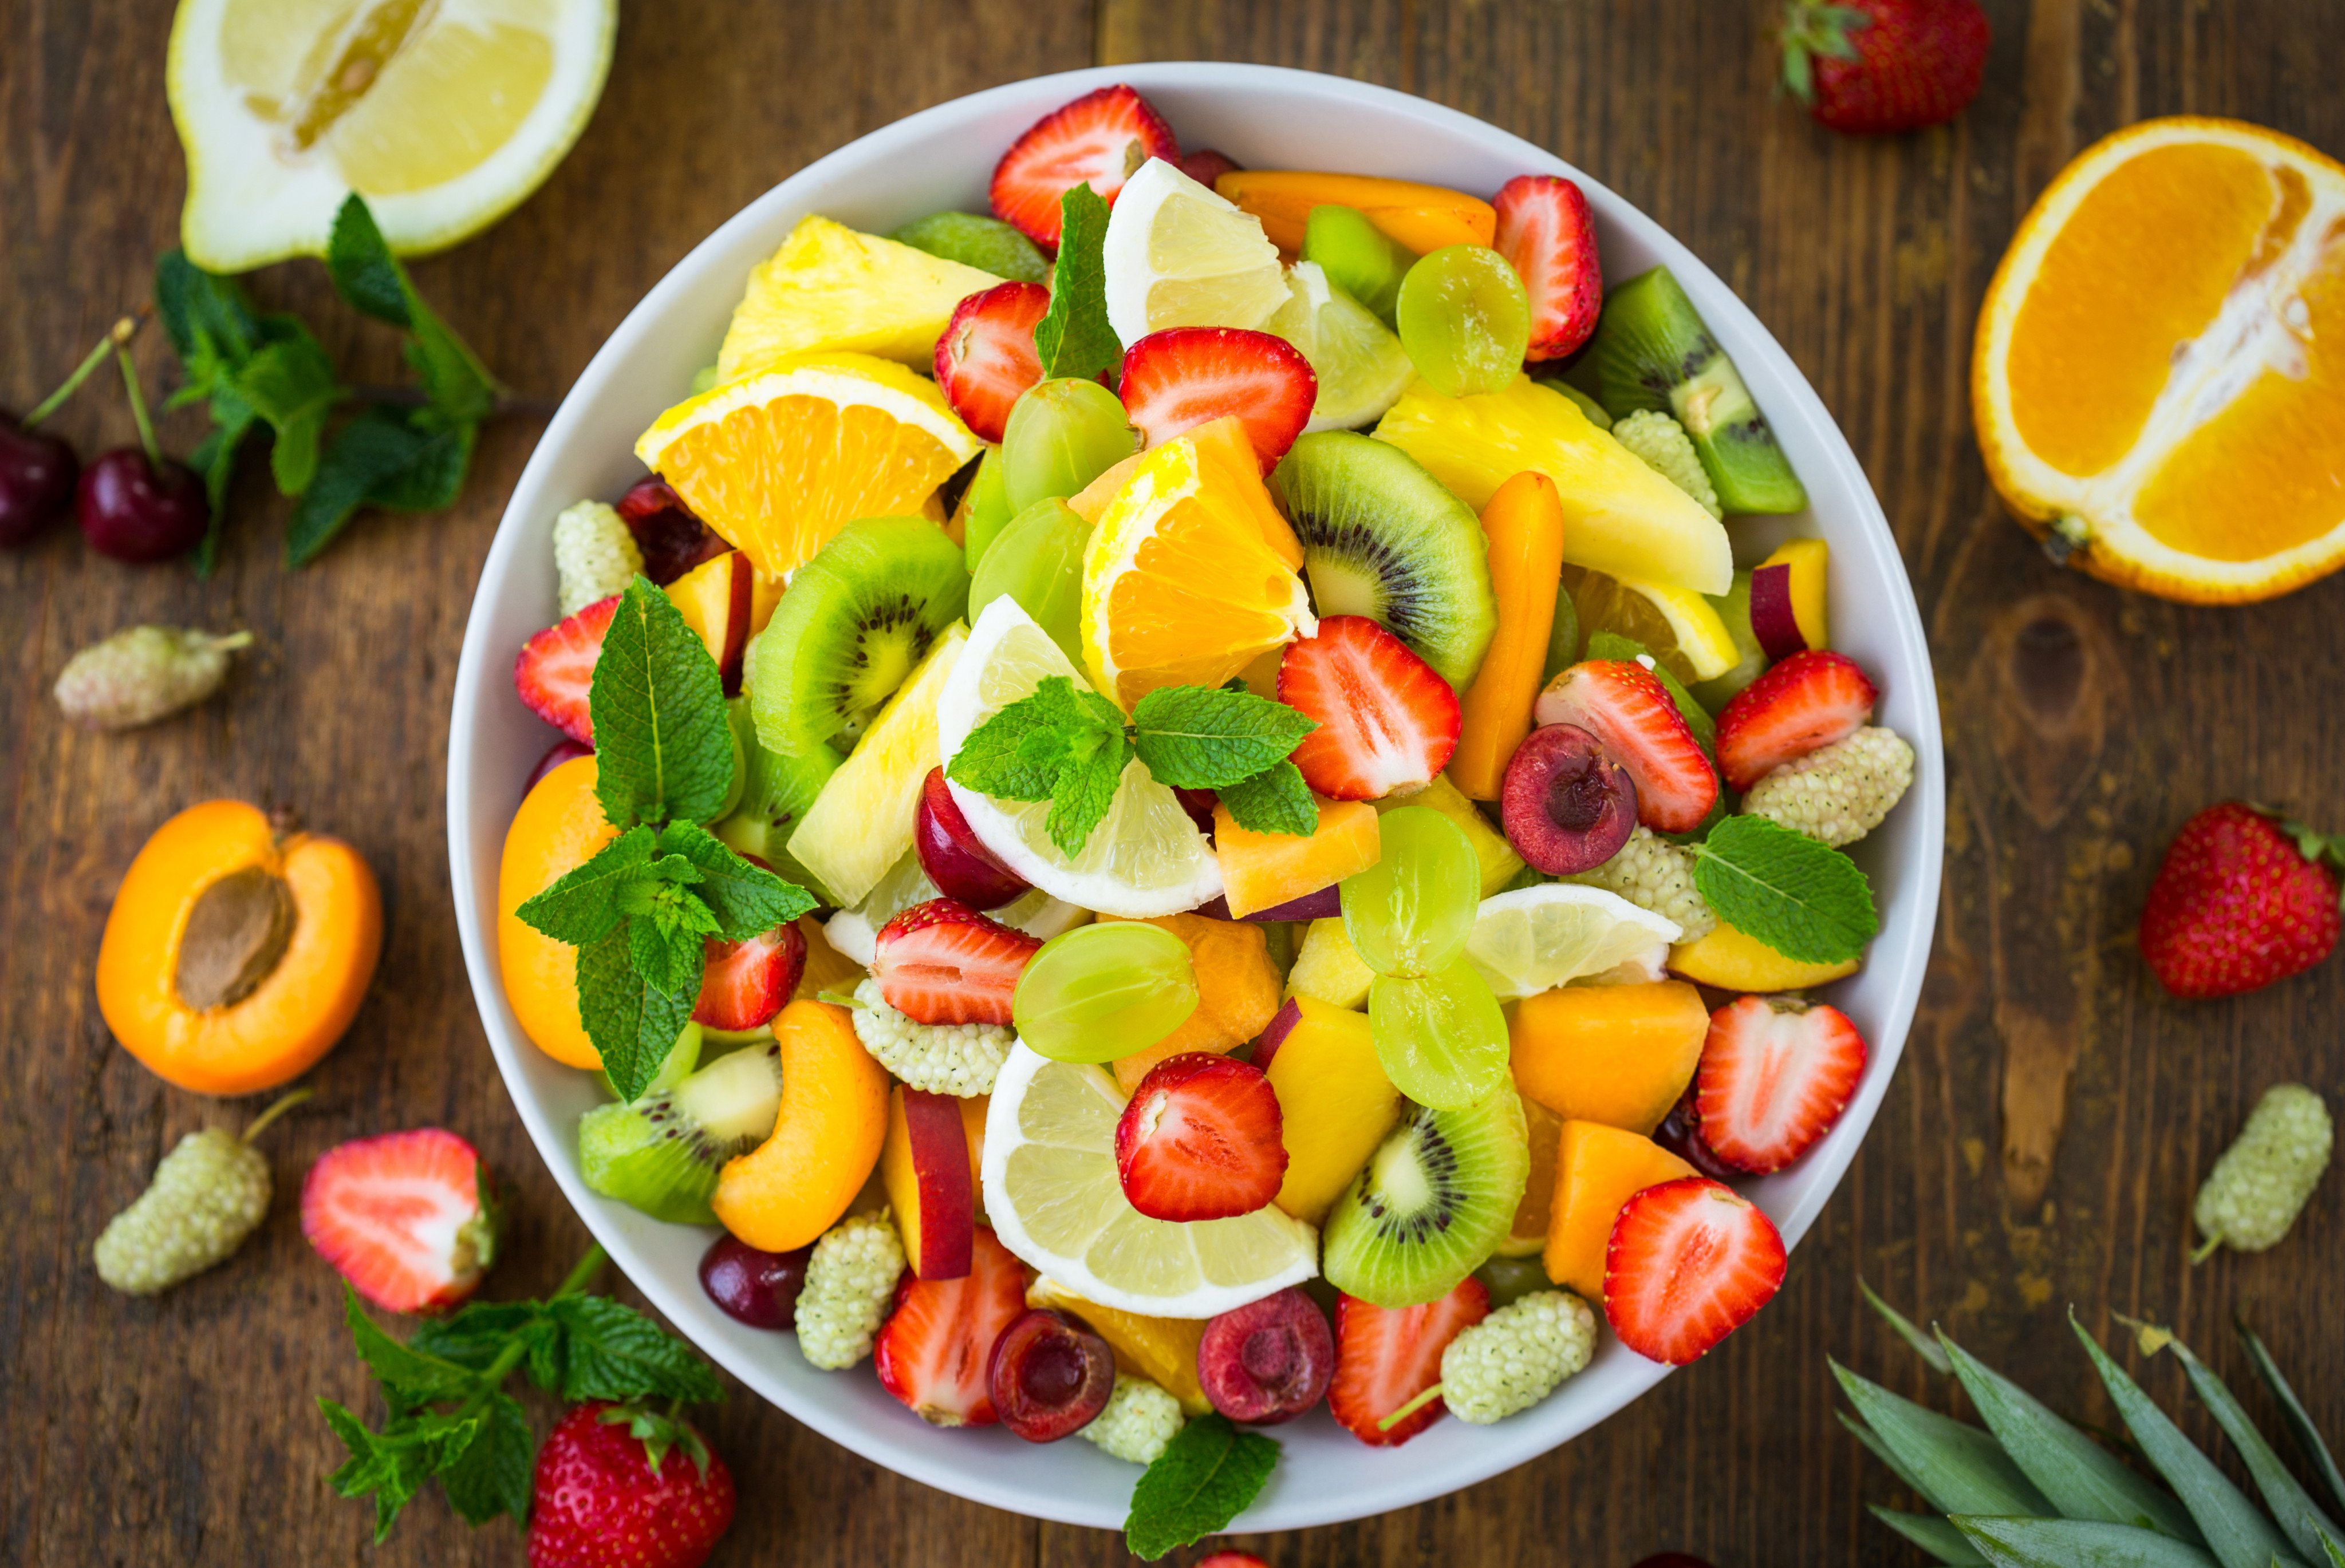 Berries, citrus fruits and melons are three groups of “power foods” that can help in losing weight. A nutrition doctor explains how they work, while we look at shedding the kilos and keeping them off. Photo: Shutterstock